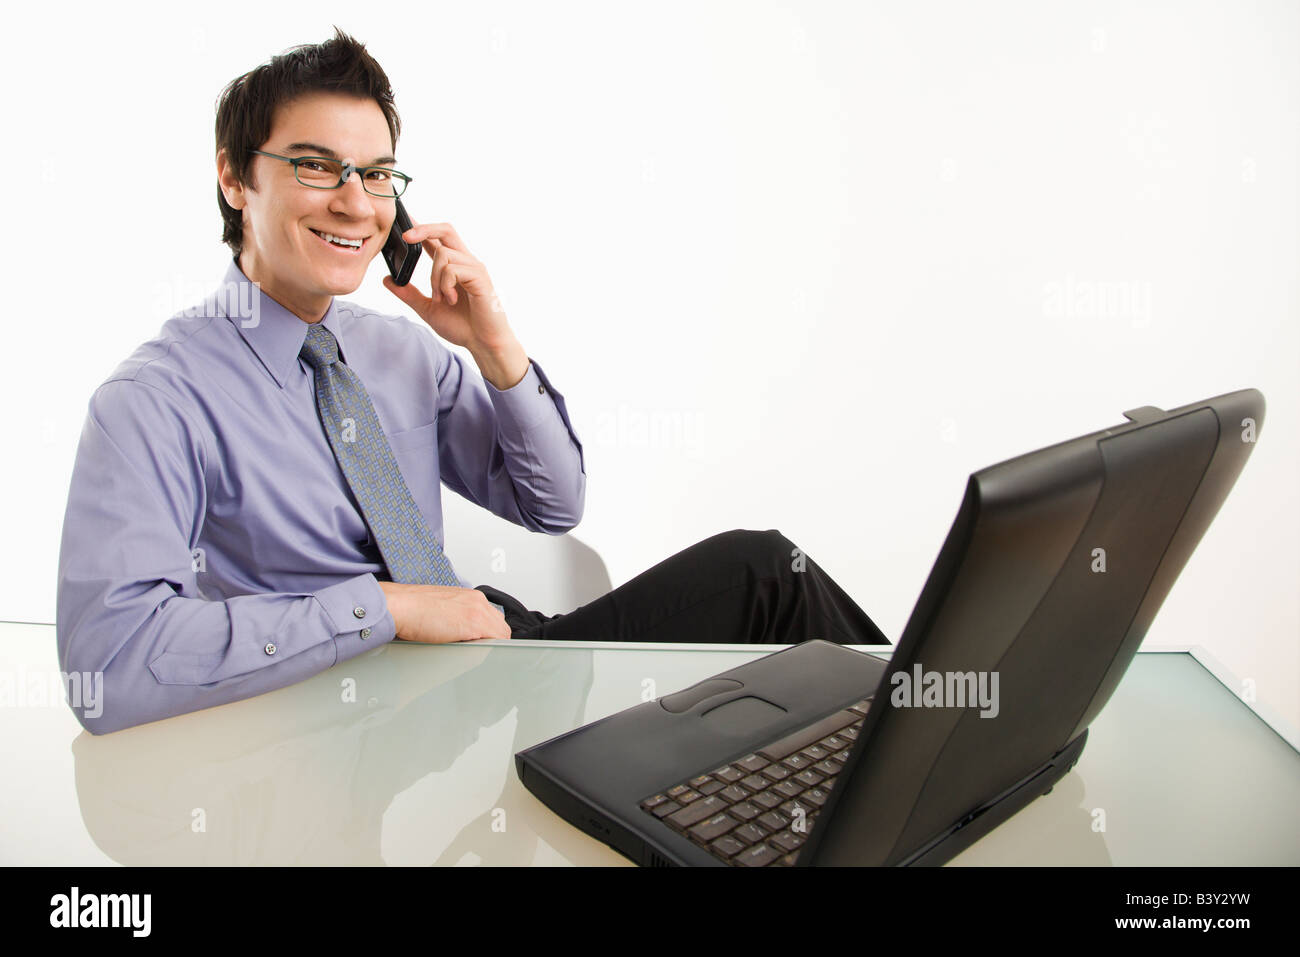 Smiling Asian businessman sitting at desk talking on cellphone Stock Photo